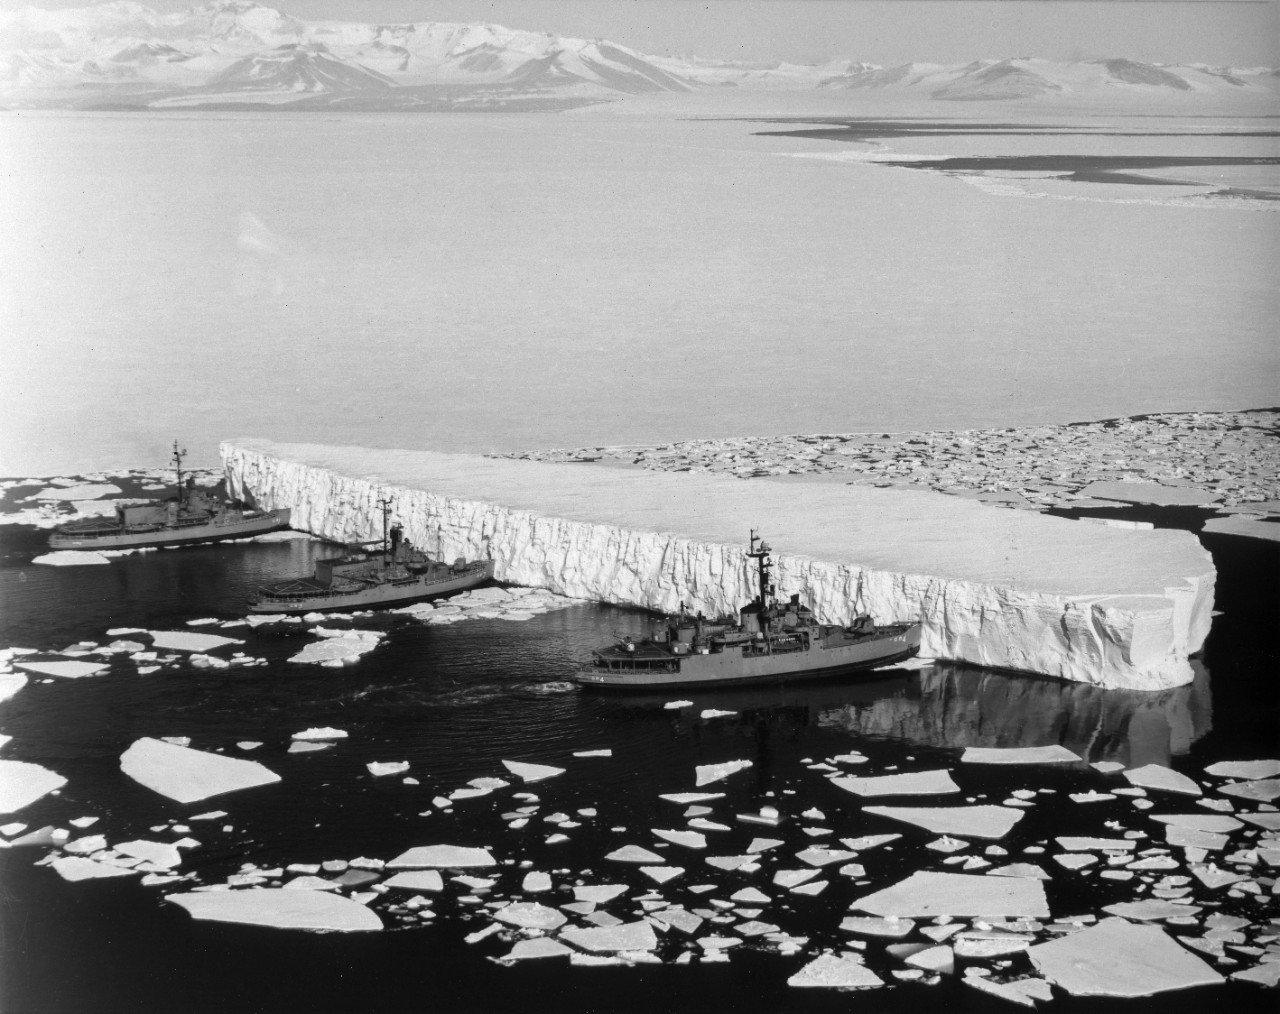 Burton Island, Atka, and Glacier push together to move a huge iceberg from the channel to McMurdo Station, Antarctica, 29 December 1965. (U.S. Navy Photograph USN 827218l, National Archives and Records Administration, Still Pictures Branch, College Park, Md., copy in files of Naval History and Heritage Command)